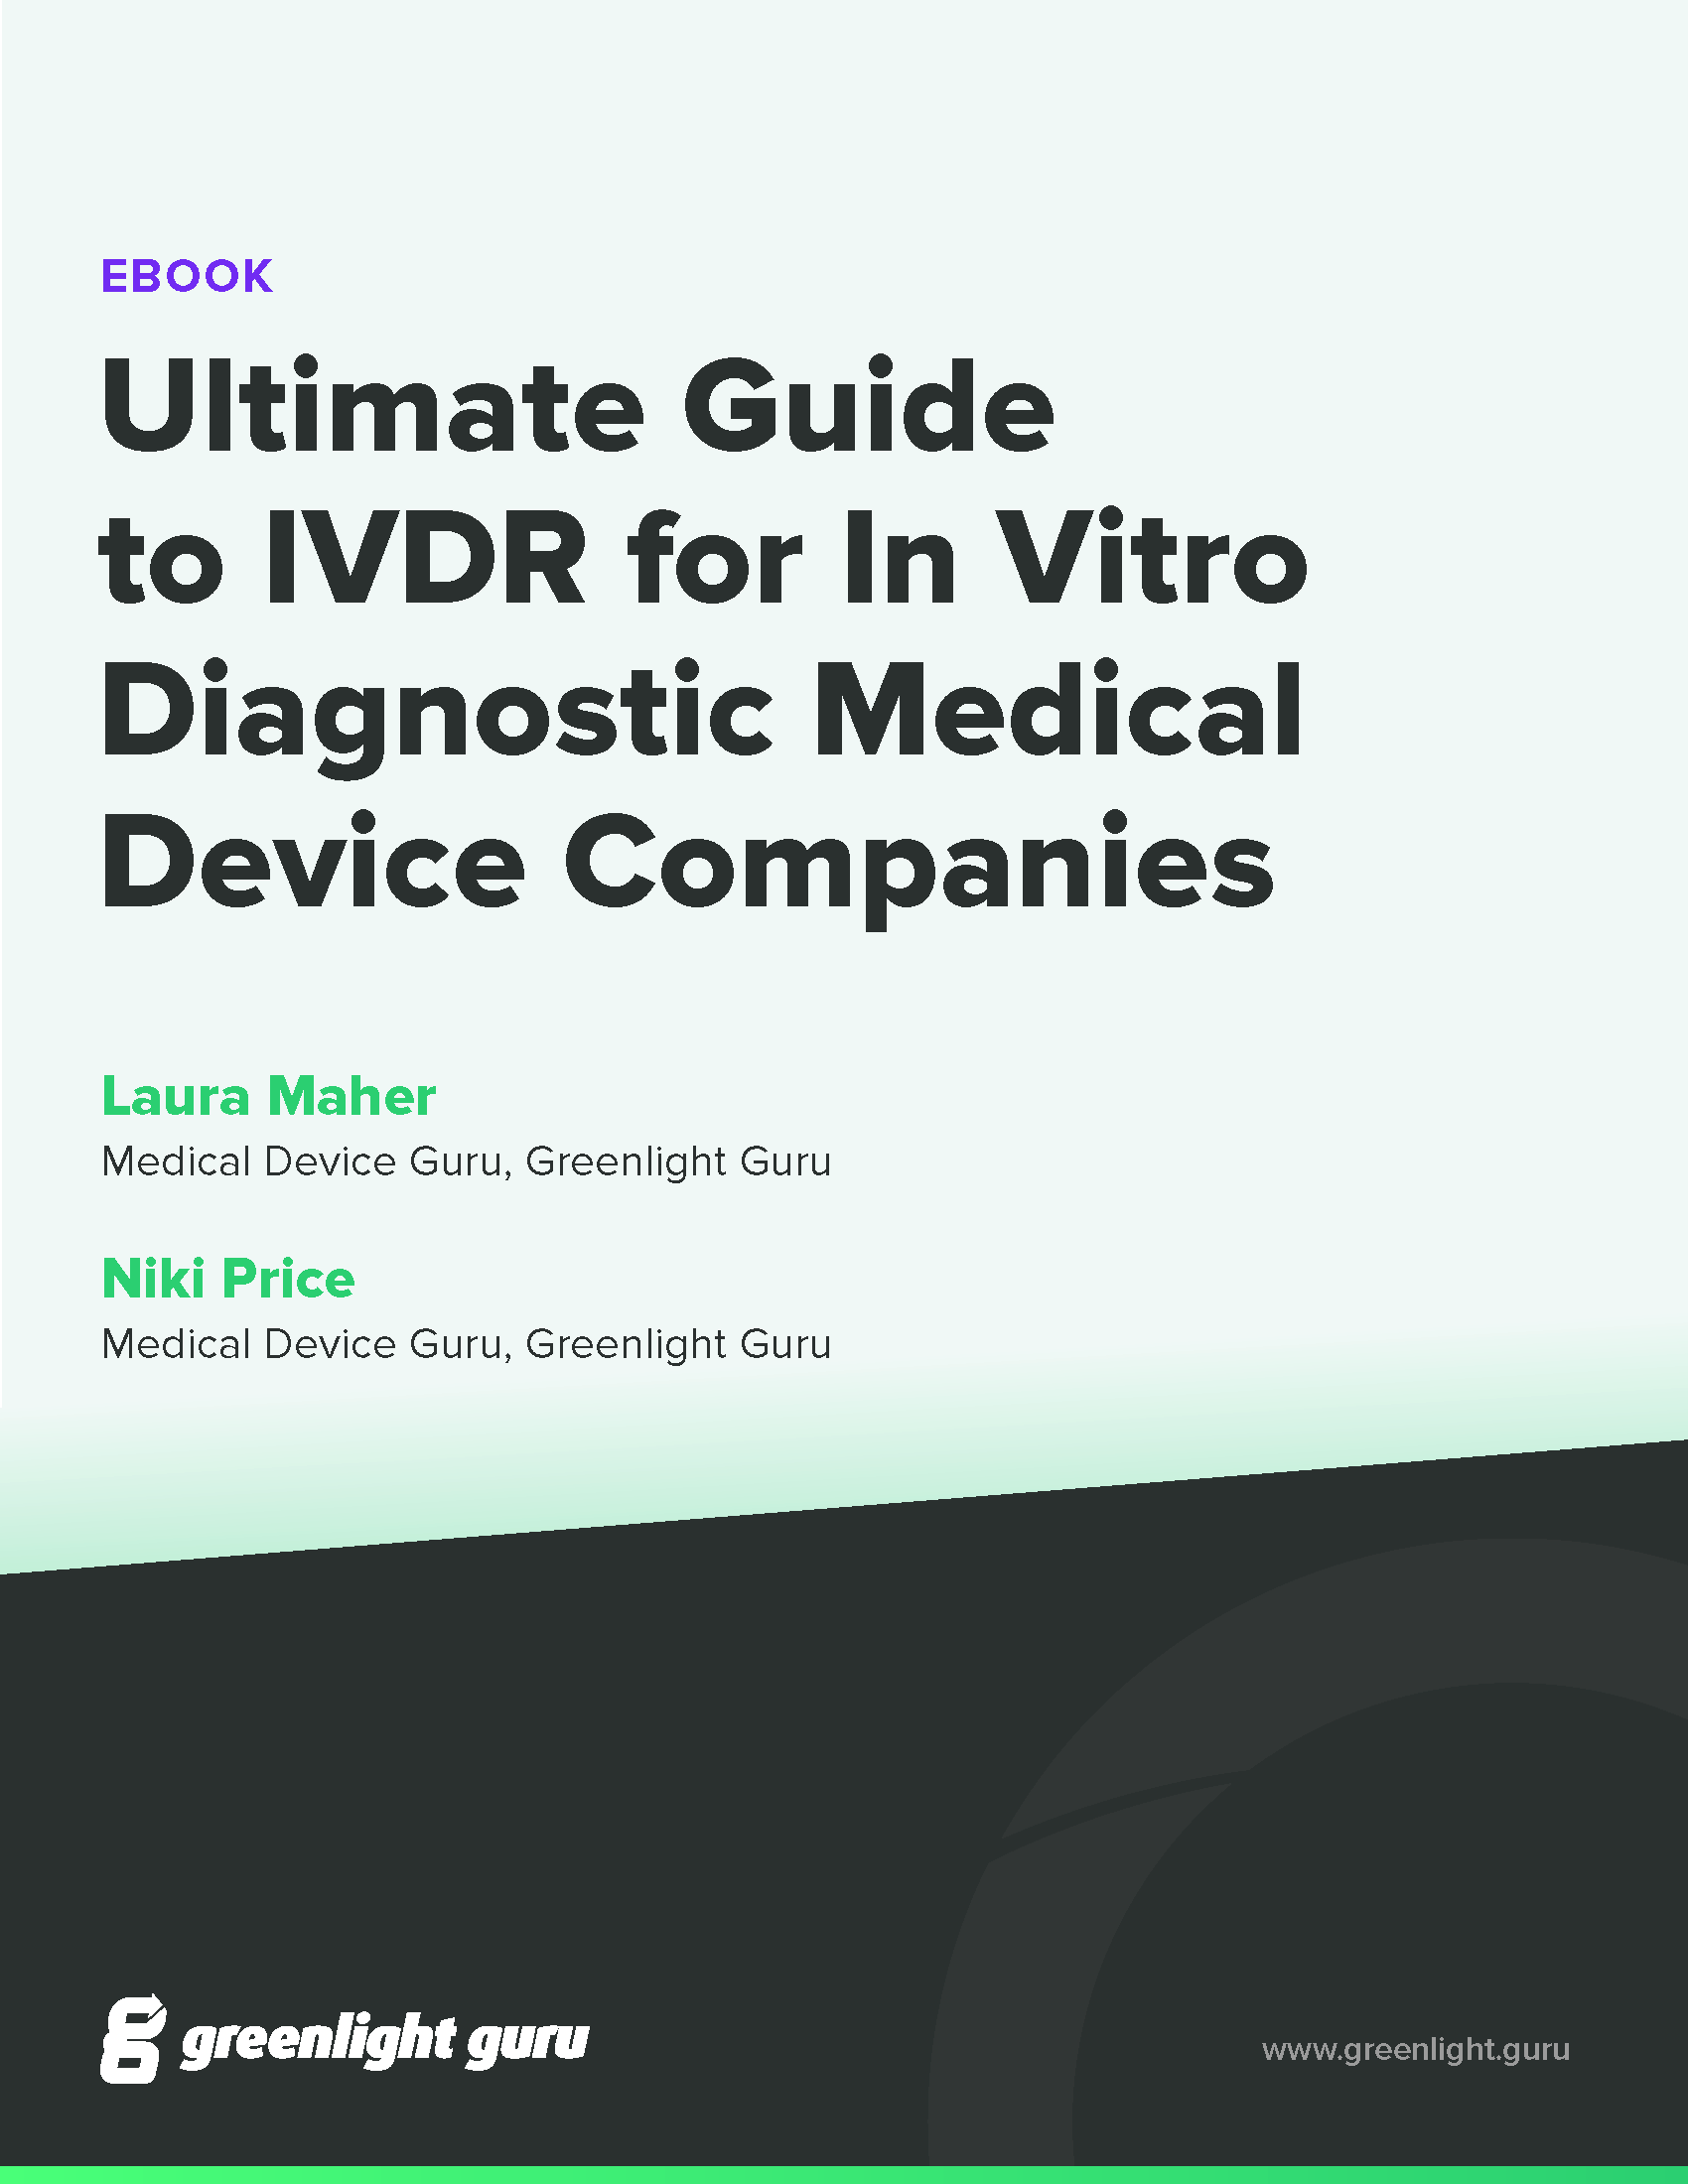 Ultimate Guide to IVDR (cover)